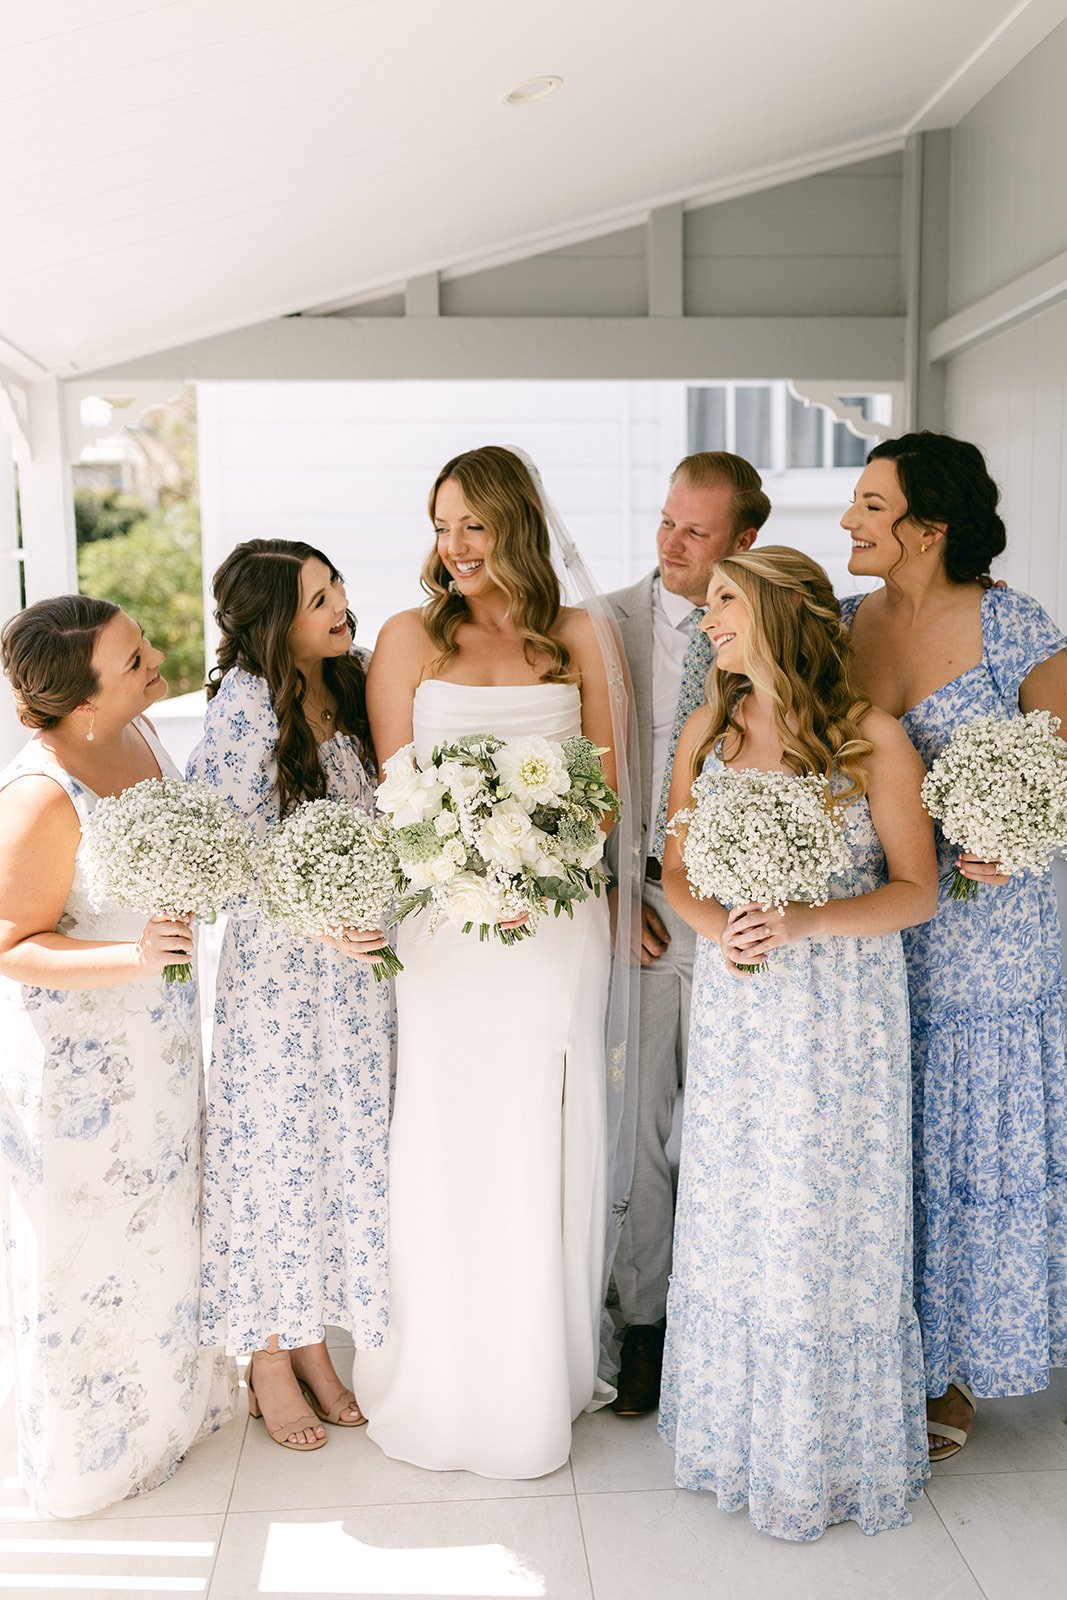 A bride is surrounded by her bridal party. They are wearing a mix match of white and blue floral dresses